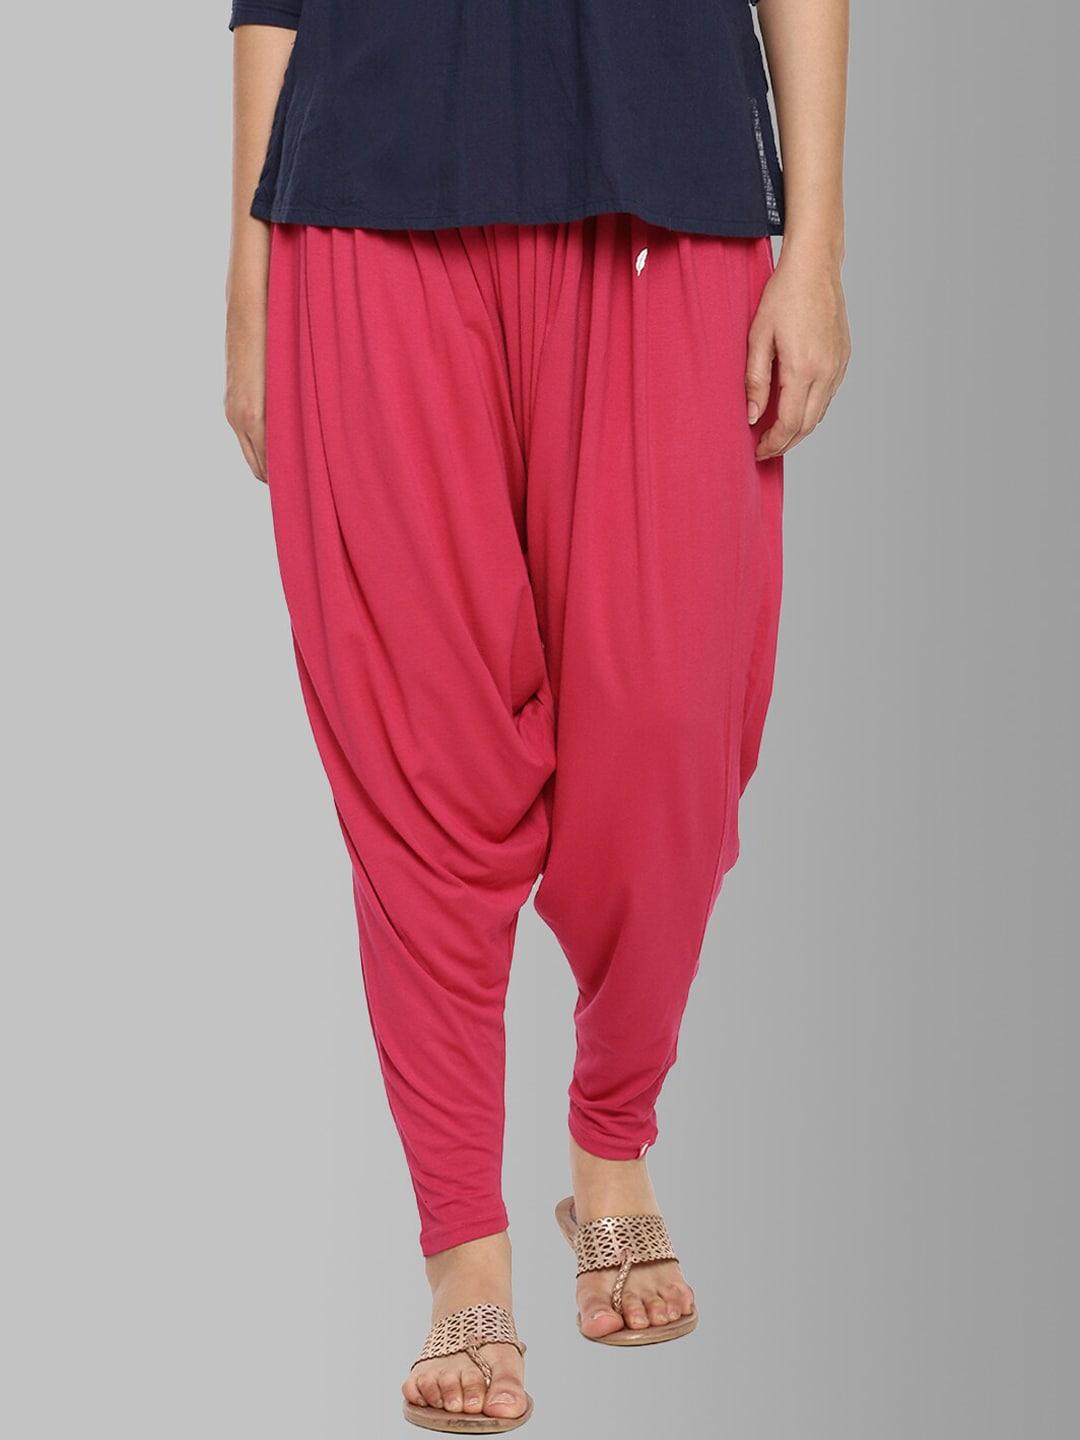 feather-soft-elite-women-fuchsia-solid-loose-fit-patialas